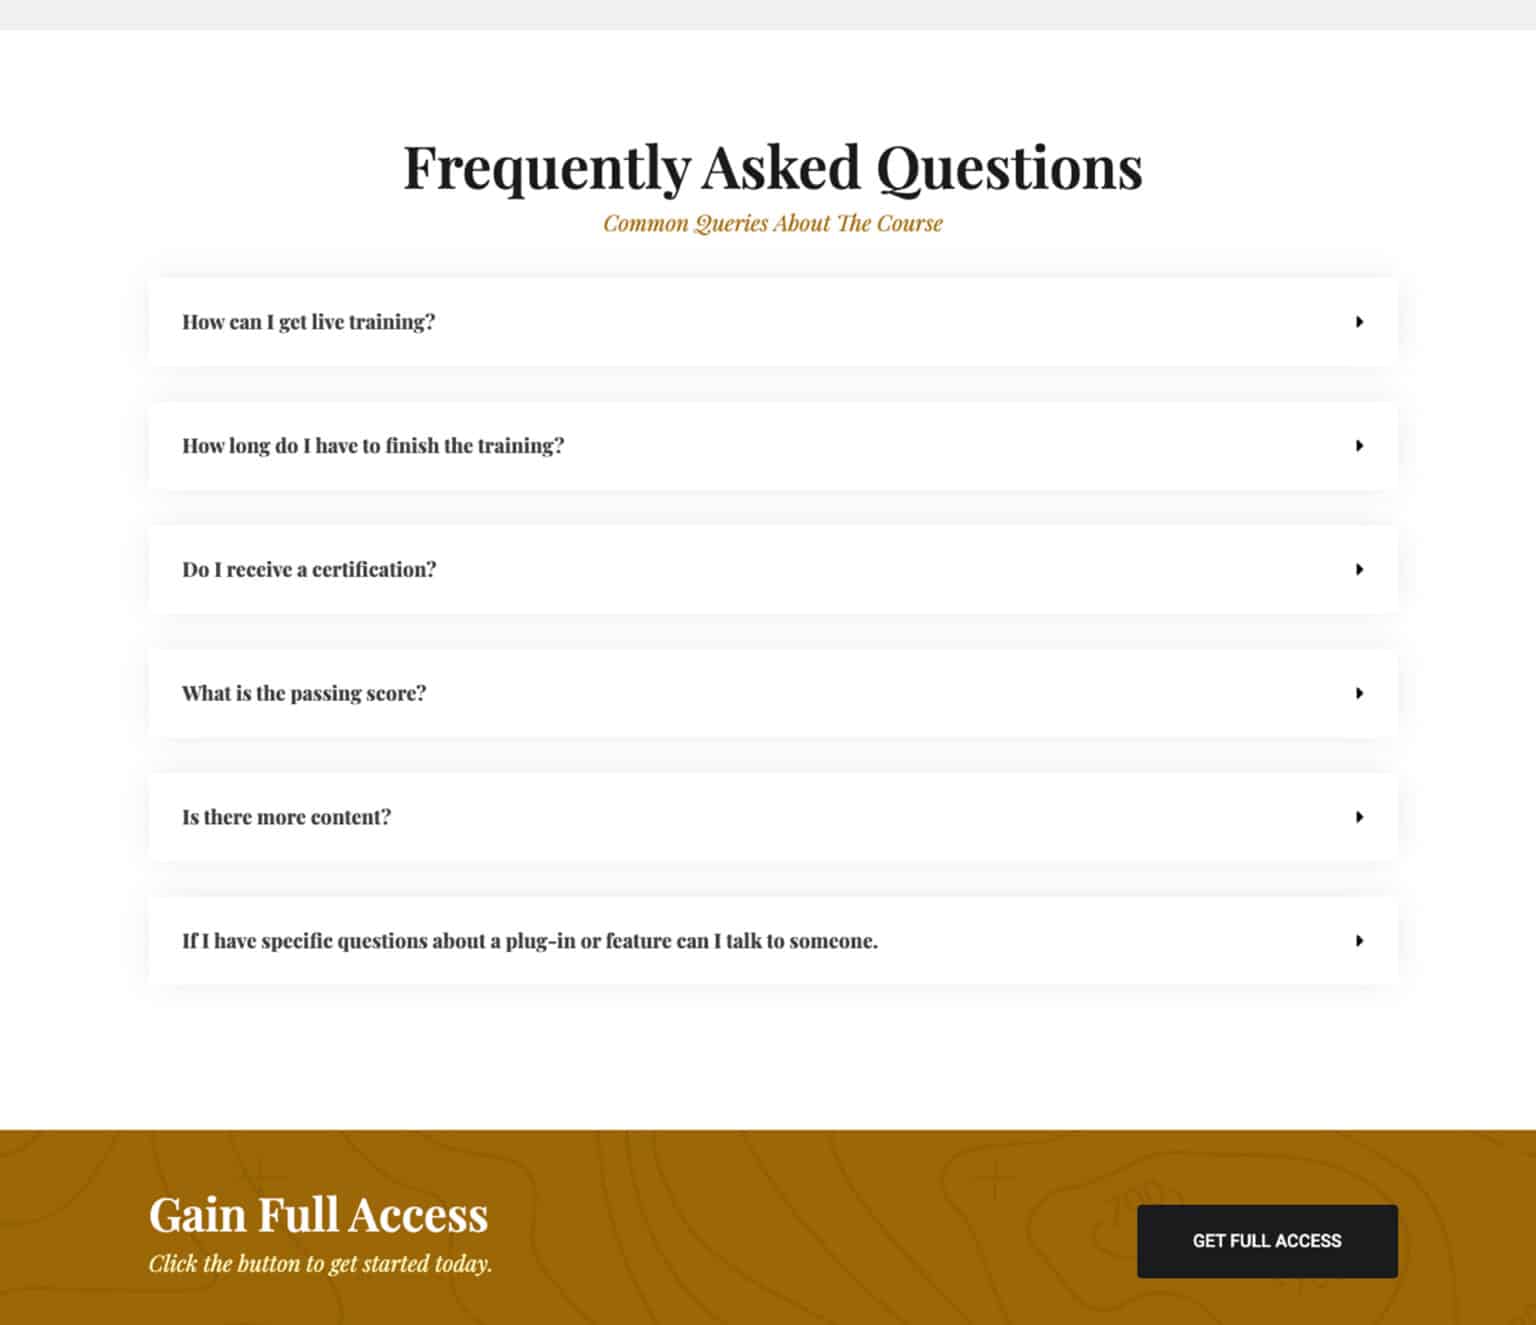 A website page showing frequently asked questions.